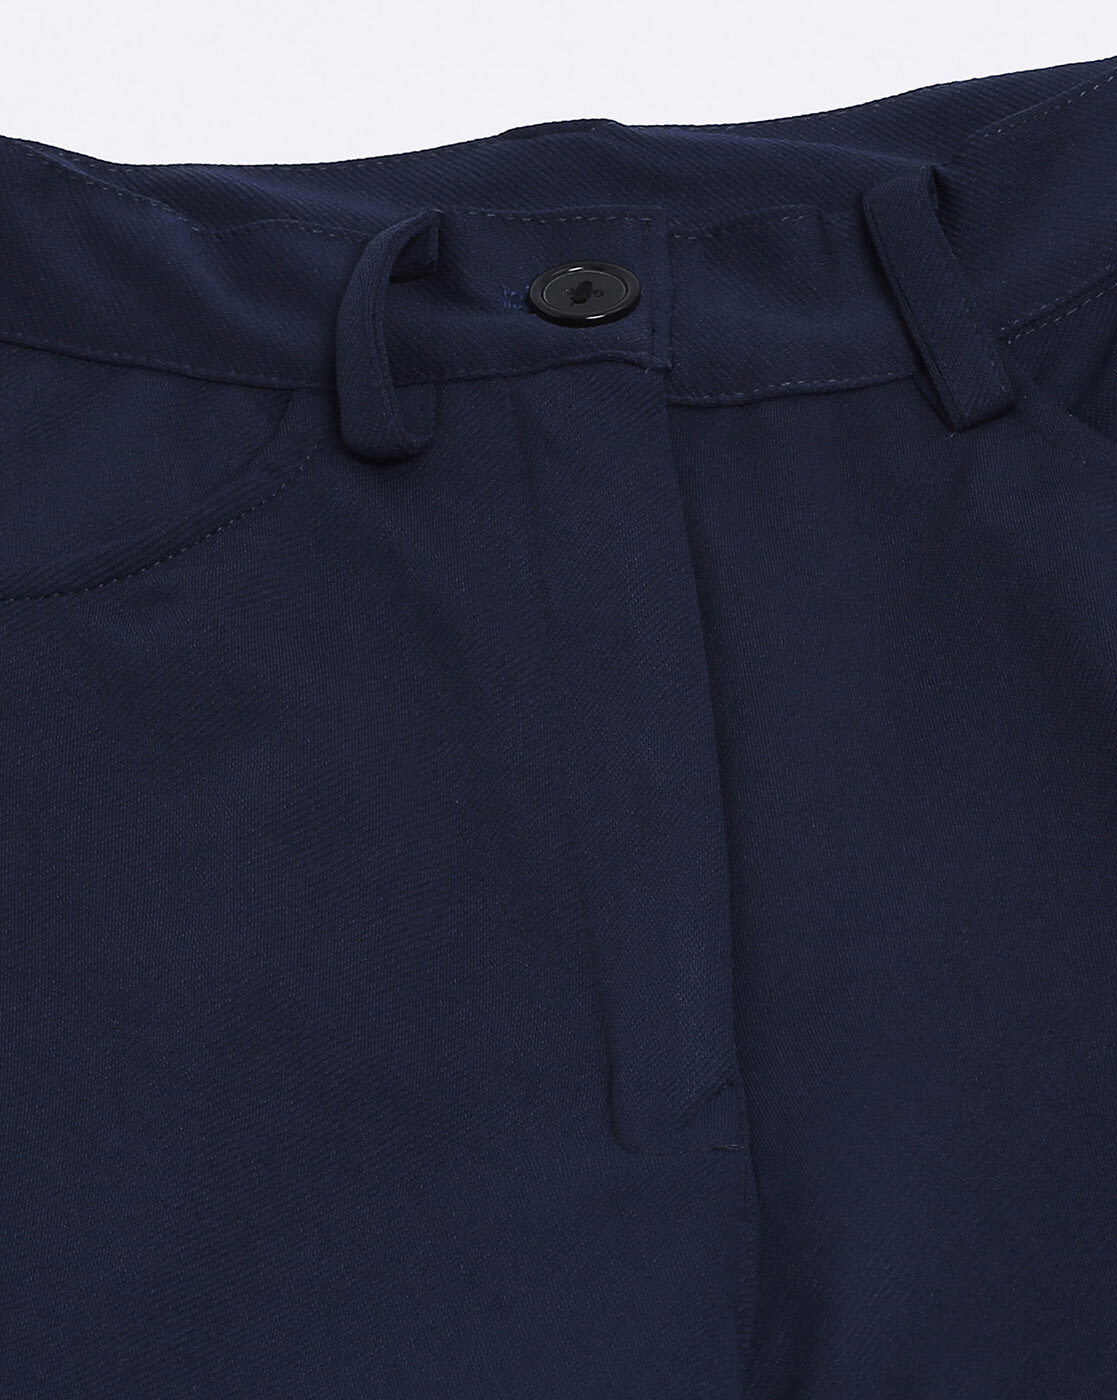 Buy Navy Blue Trousers & Pants for Women by SELVIA Online